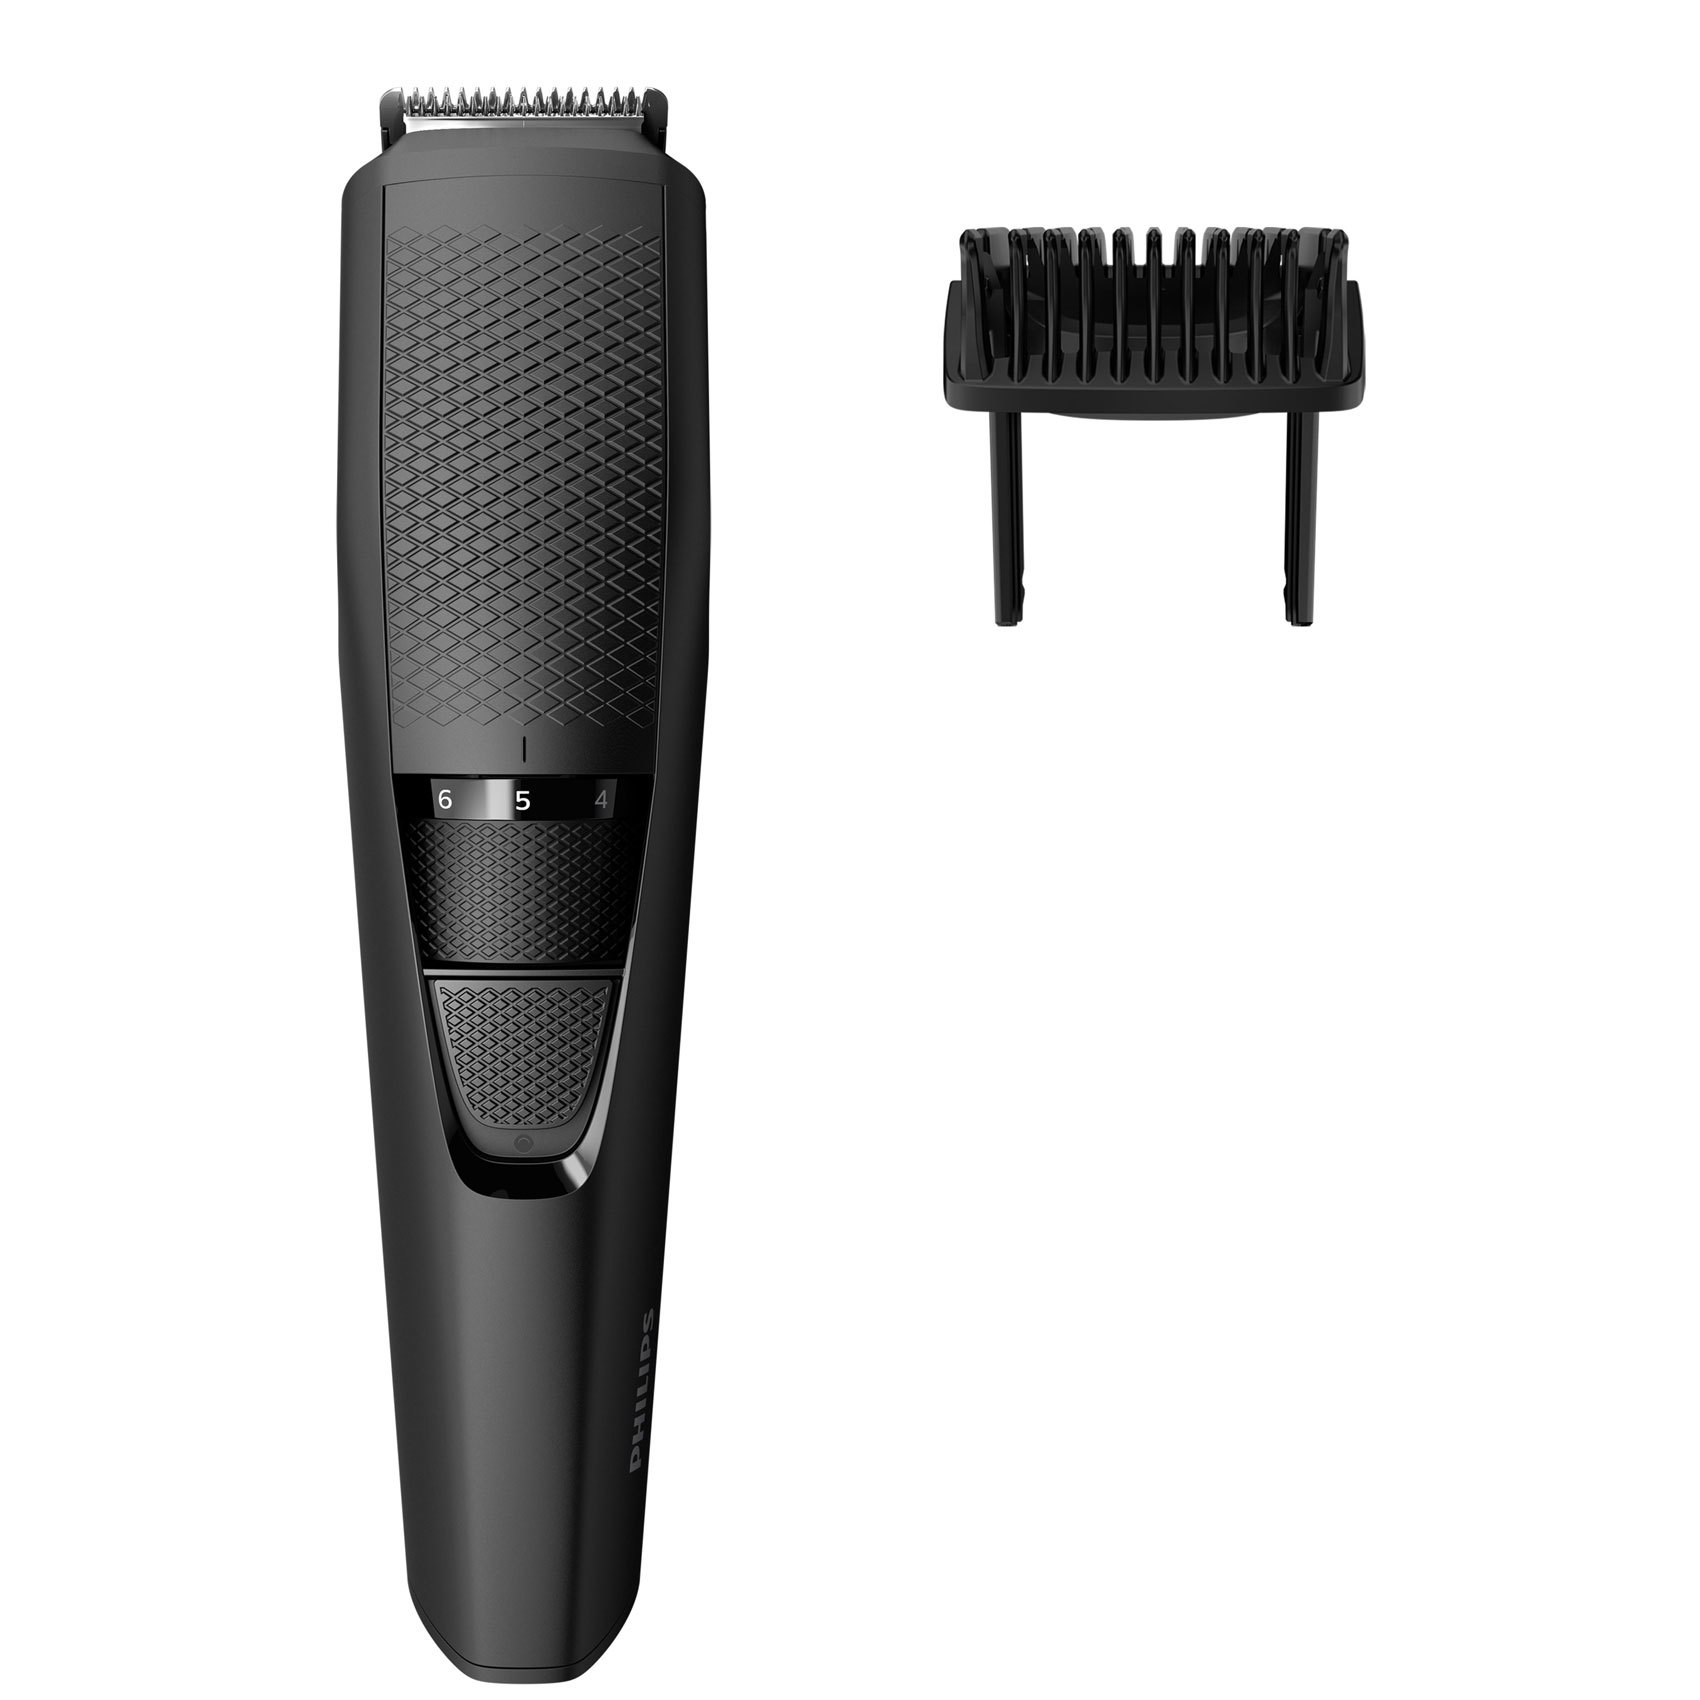 trimmer philips 3000